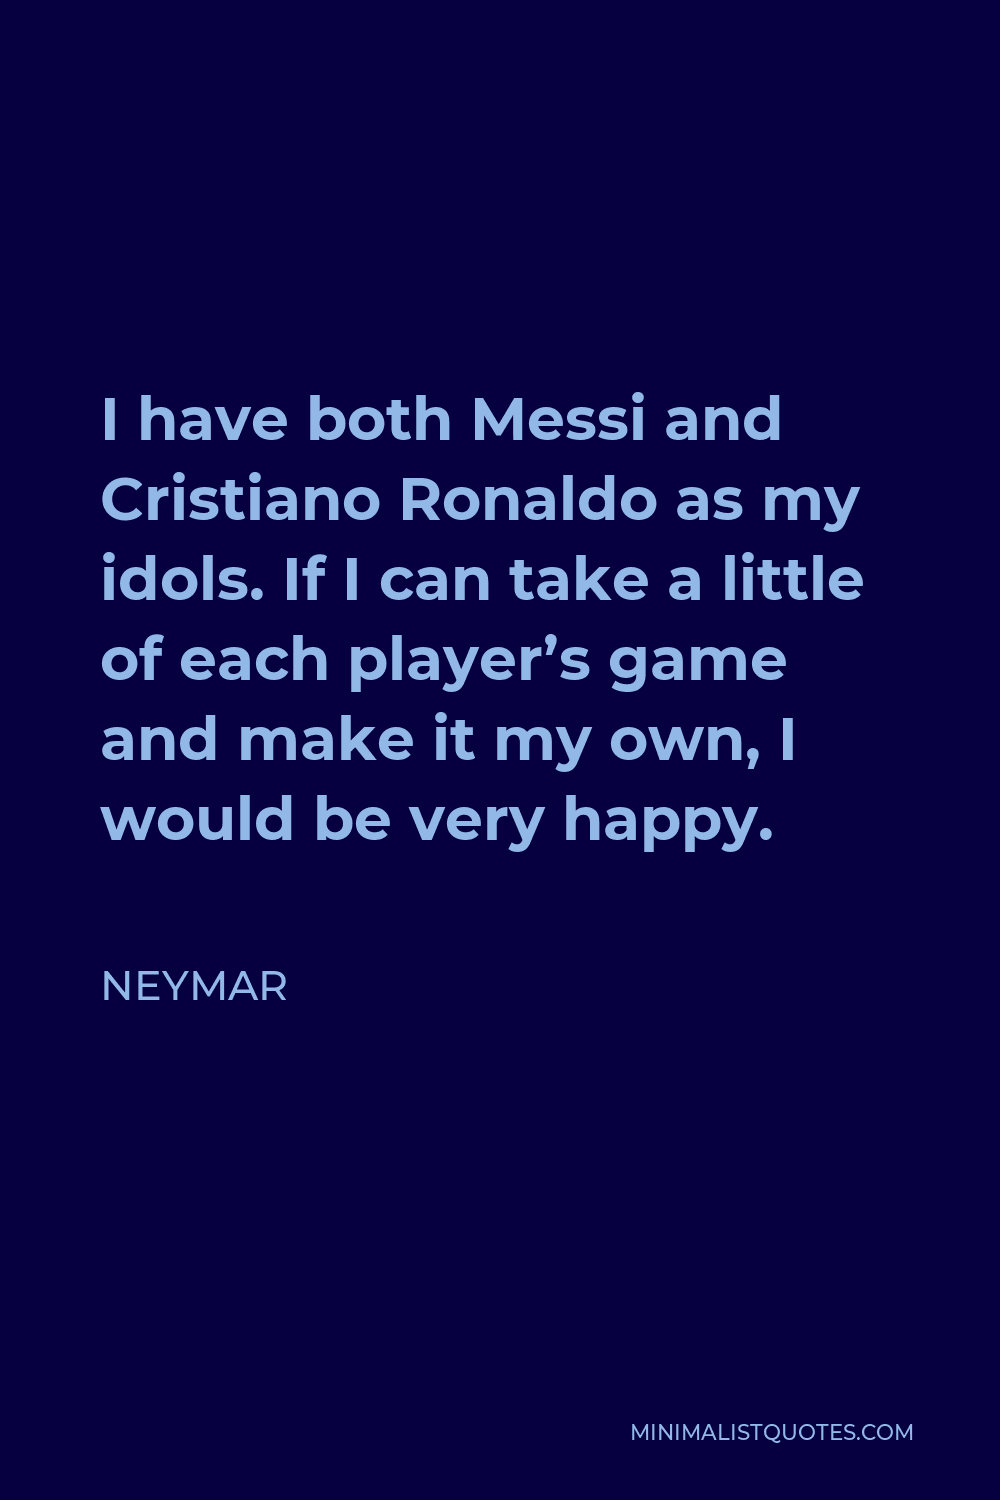 Neymar Quote - I have both Messi and Cristiano Ronaldo as my idols. If I can take a little of each player’s game and make it my own, I would be very happy.